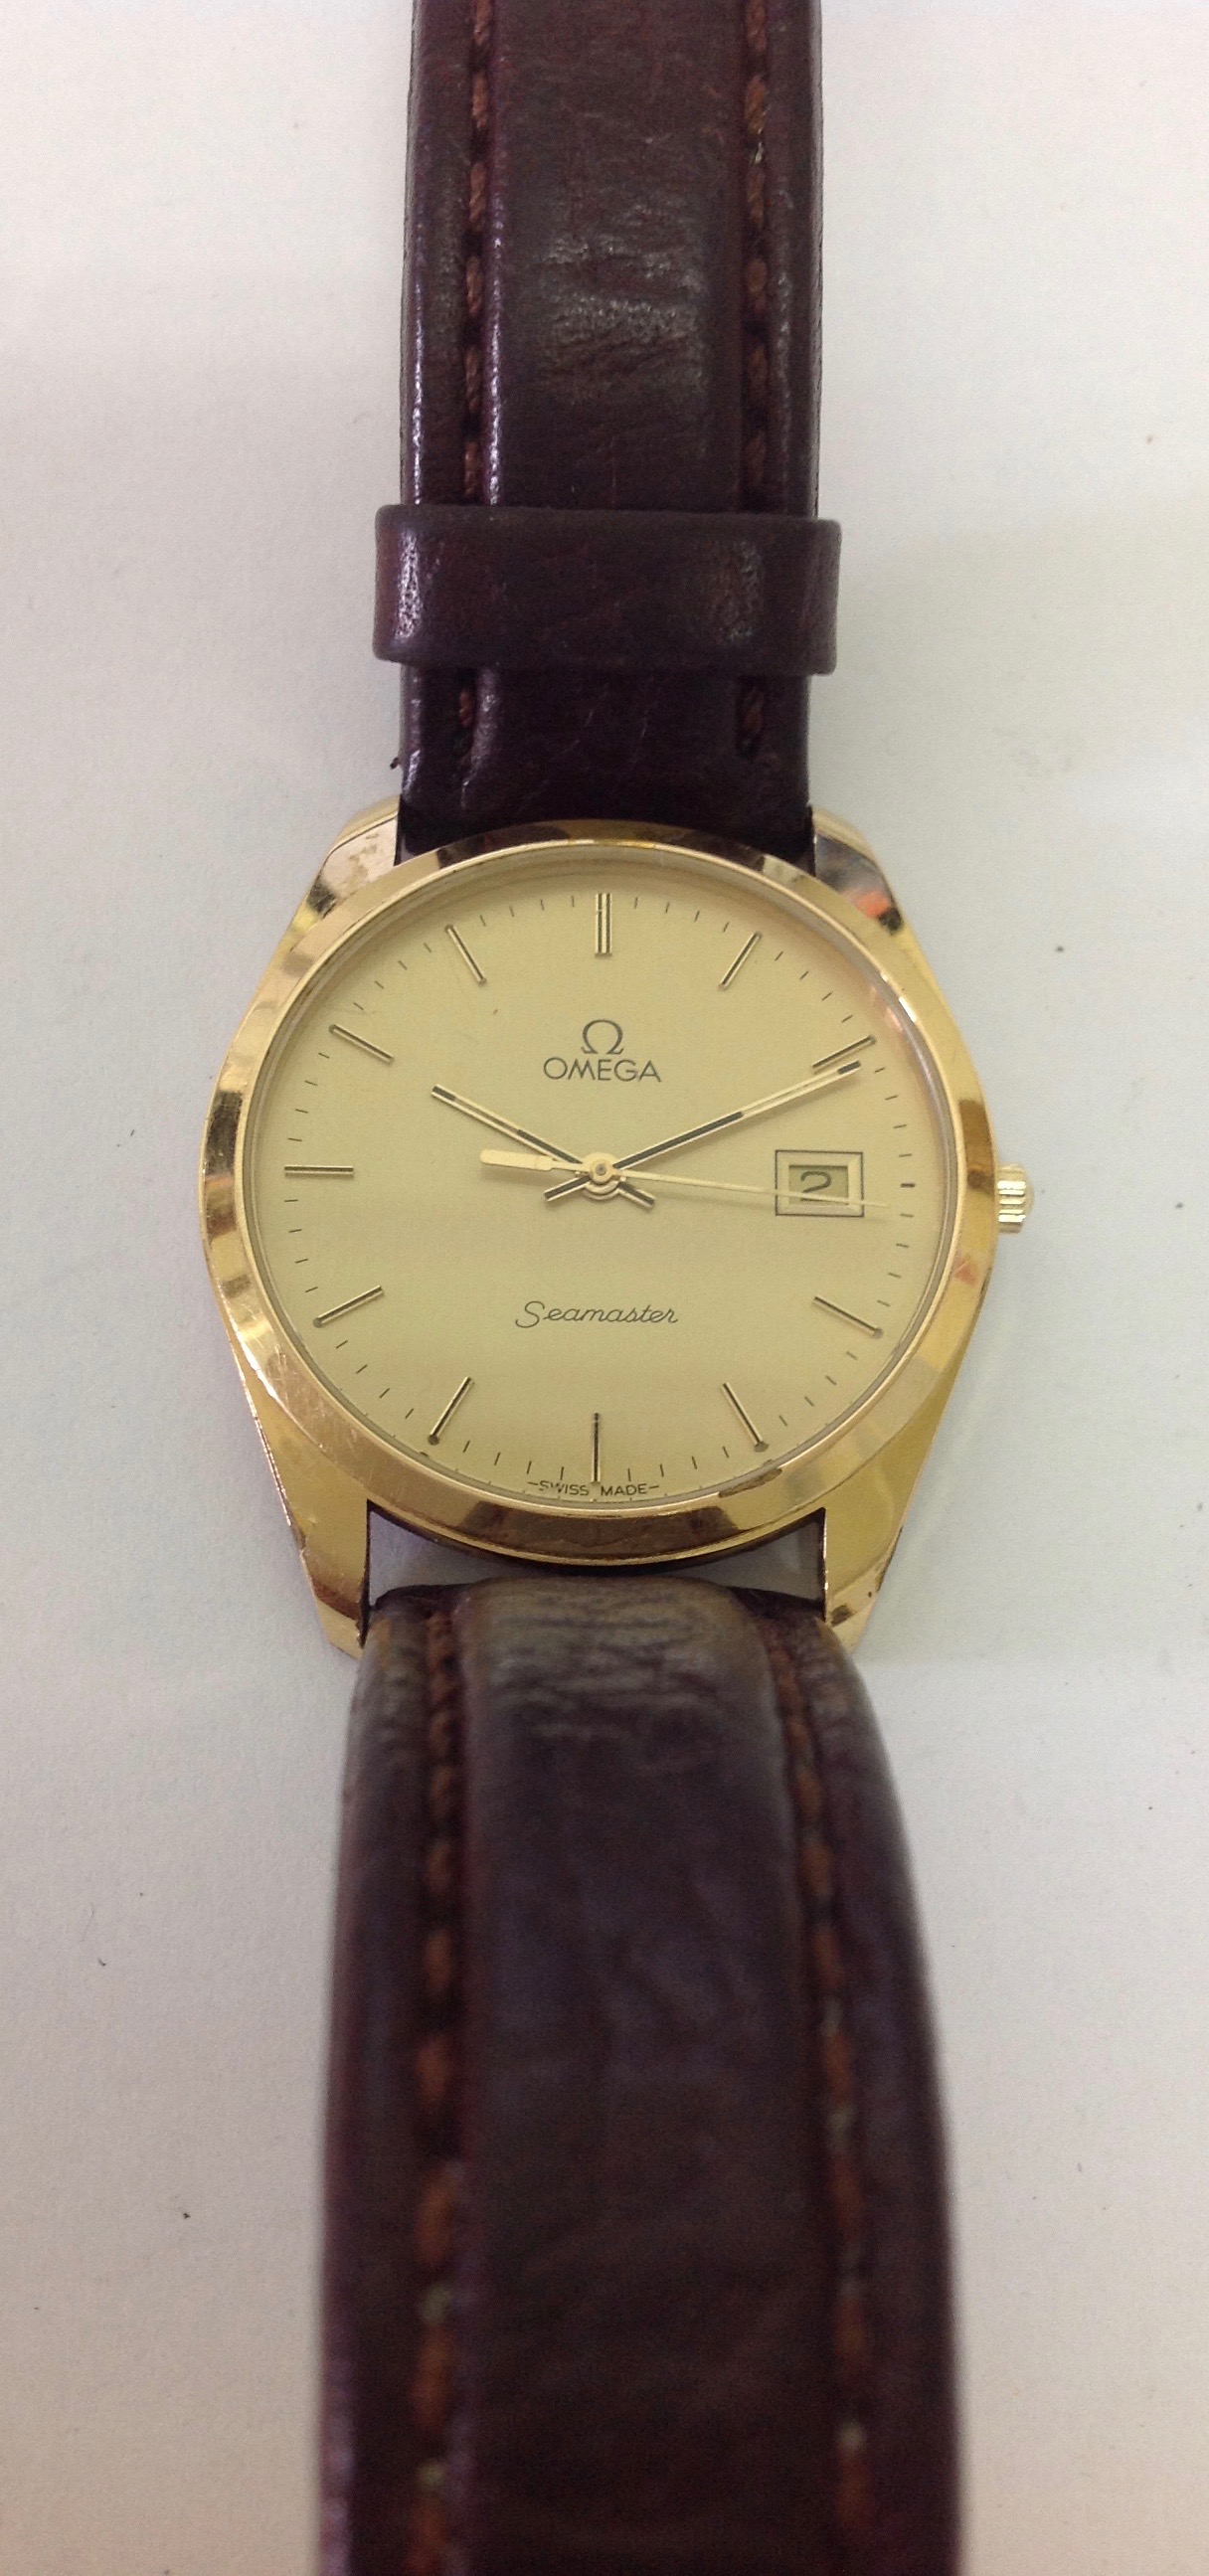 An Omega Seamaster gold plated wristwatch - Image 4 of 5